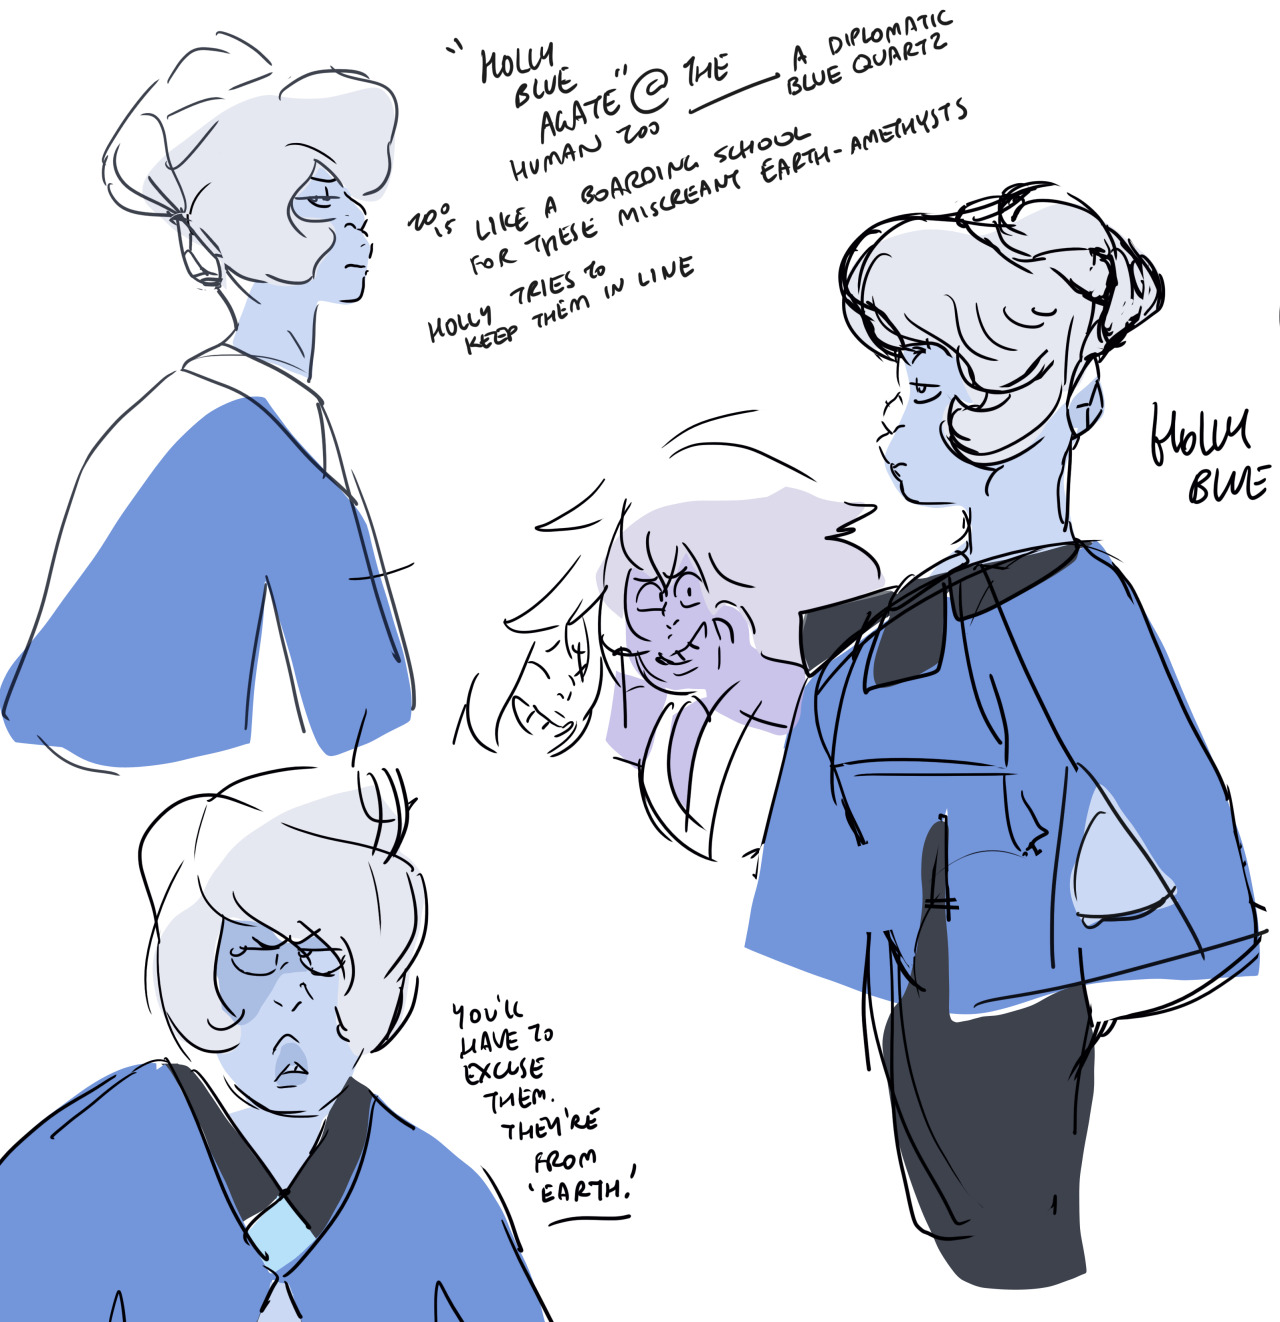 rebeccasugar:Early concepts for Holly Blue Agate, July 2015